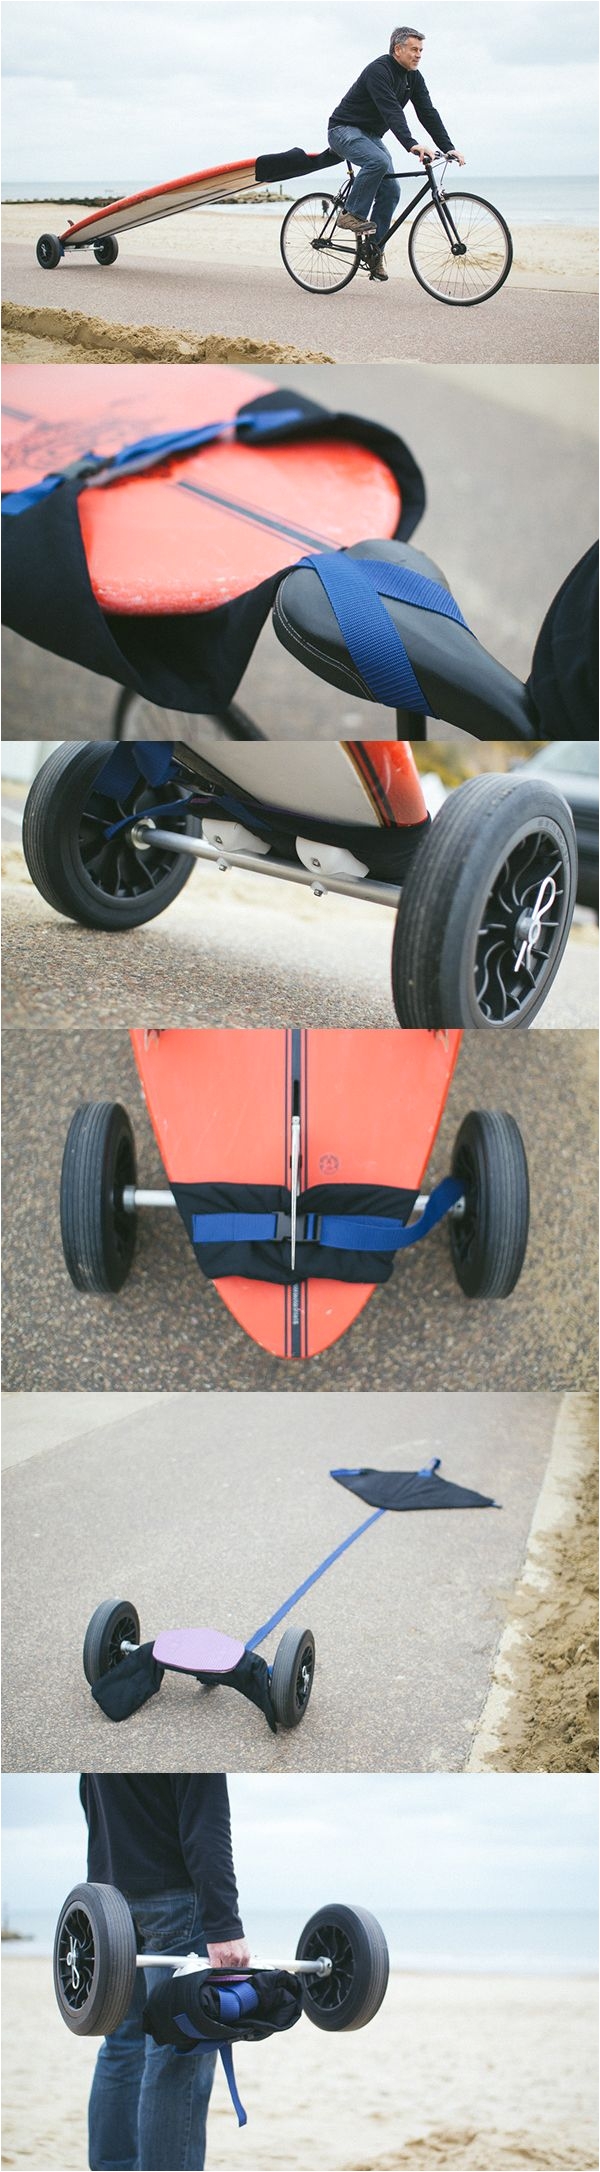 surfboard fins the surfing handbook awesome and easy diy board carrier for bikes